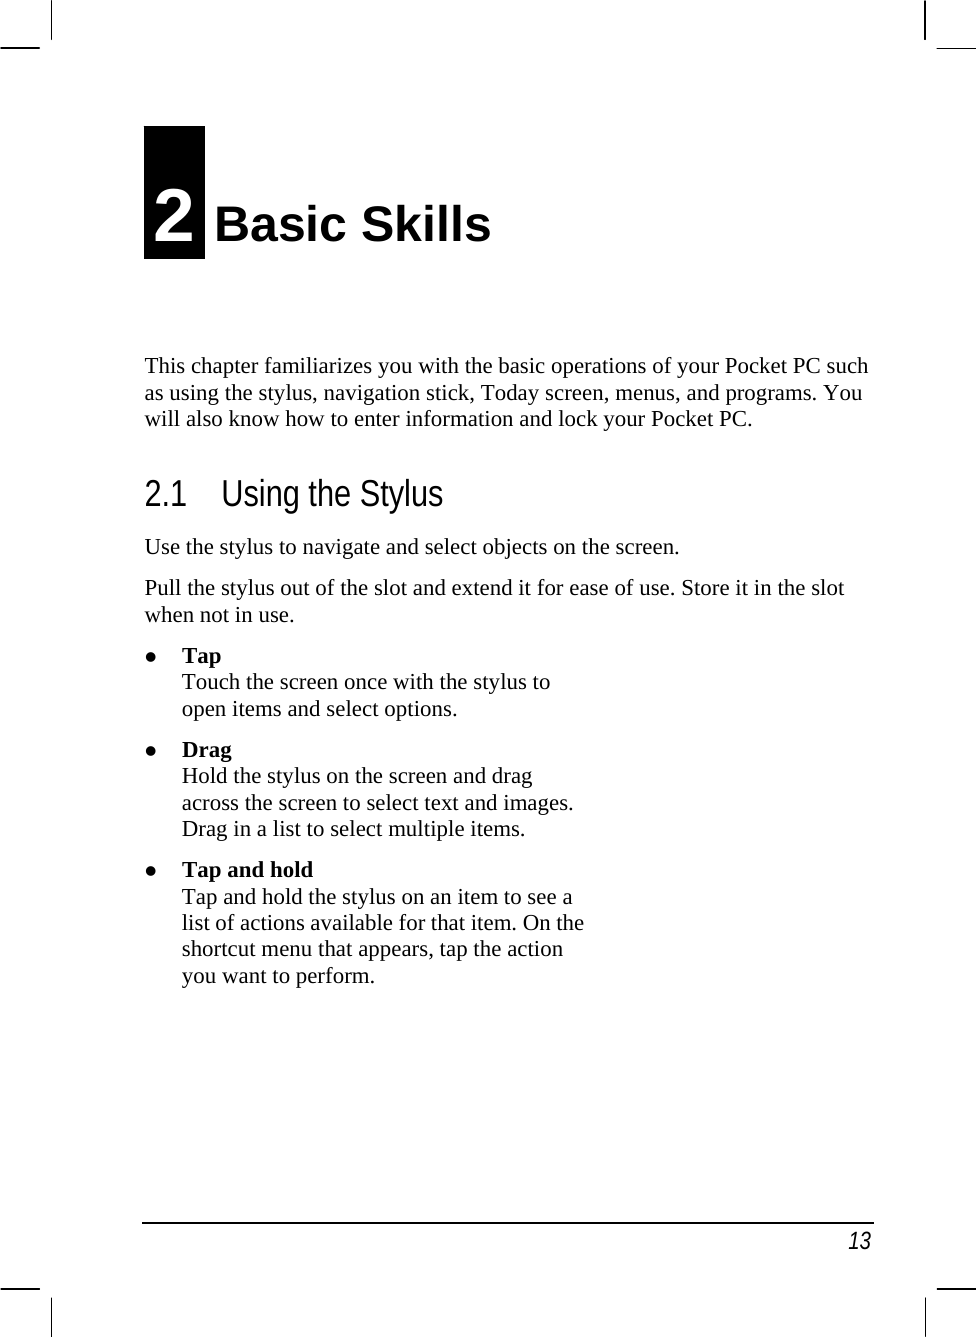   13 2 Basic Skills This chapter familiarizes you with the basic operations of your Pocket PC such as using the stylus, navigation stick, Today screen, menus, and programs. You will also know how to enter information and lock your Pocket PC. 2.1 Using the Stylus Use the stylus to navigate and select objects on the screen. Pull the stylus out of the slot and extend it for ease of use. Store it in the slot when not in use. z Tap Touch the screen once with the stylus to open items and select options. z Drag Hold the stylus on the screen and drag across the screen to select text and images. Drag in a list to select multiple items. z Tap and hold Tap and hold the stylus on an item to see a list of actions available for that item. On the shortcut menu that appears, tap the action you want to perform.      